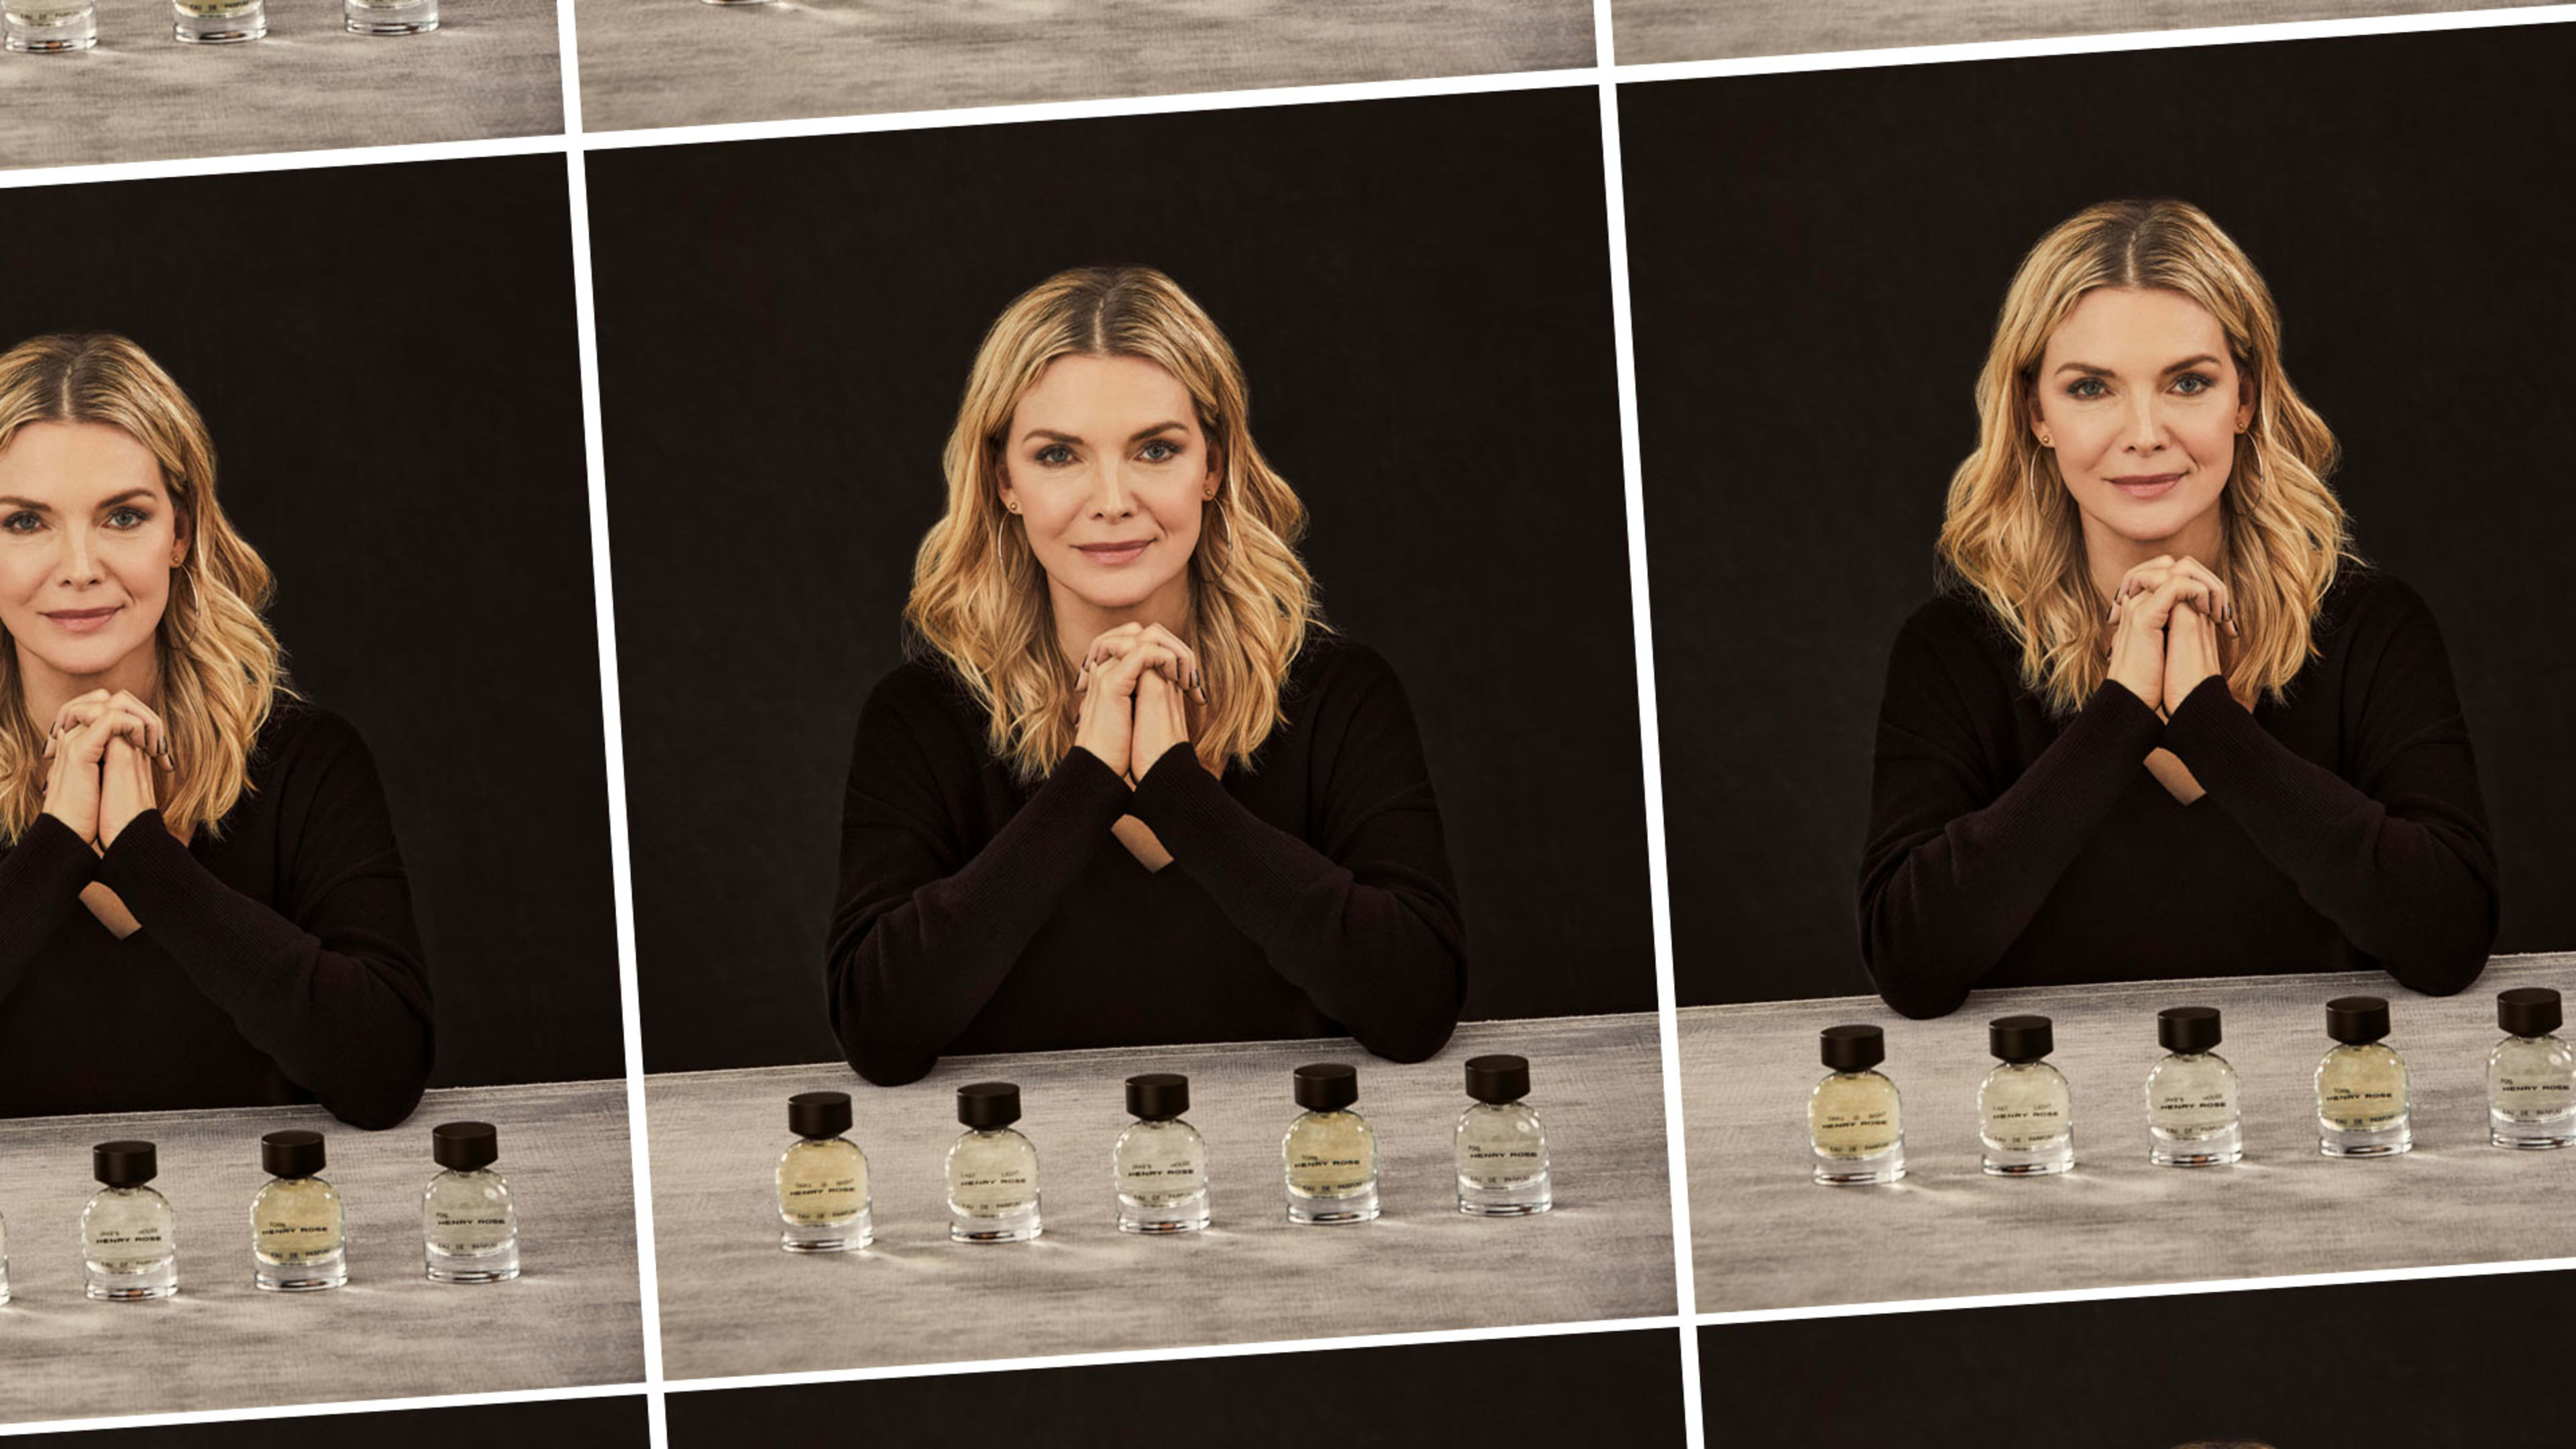 Michelle Pfeiffer’s groundbreaking new perfume line is about safety and sustainability, not vanity